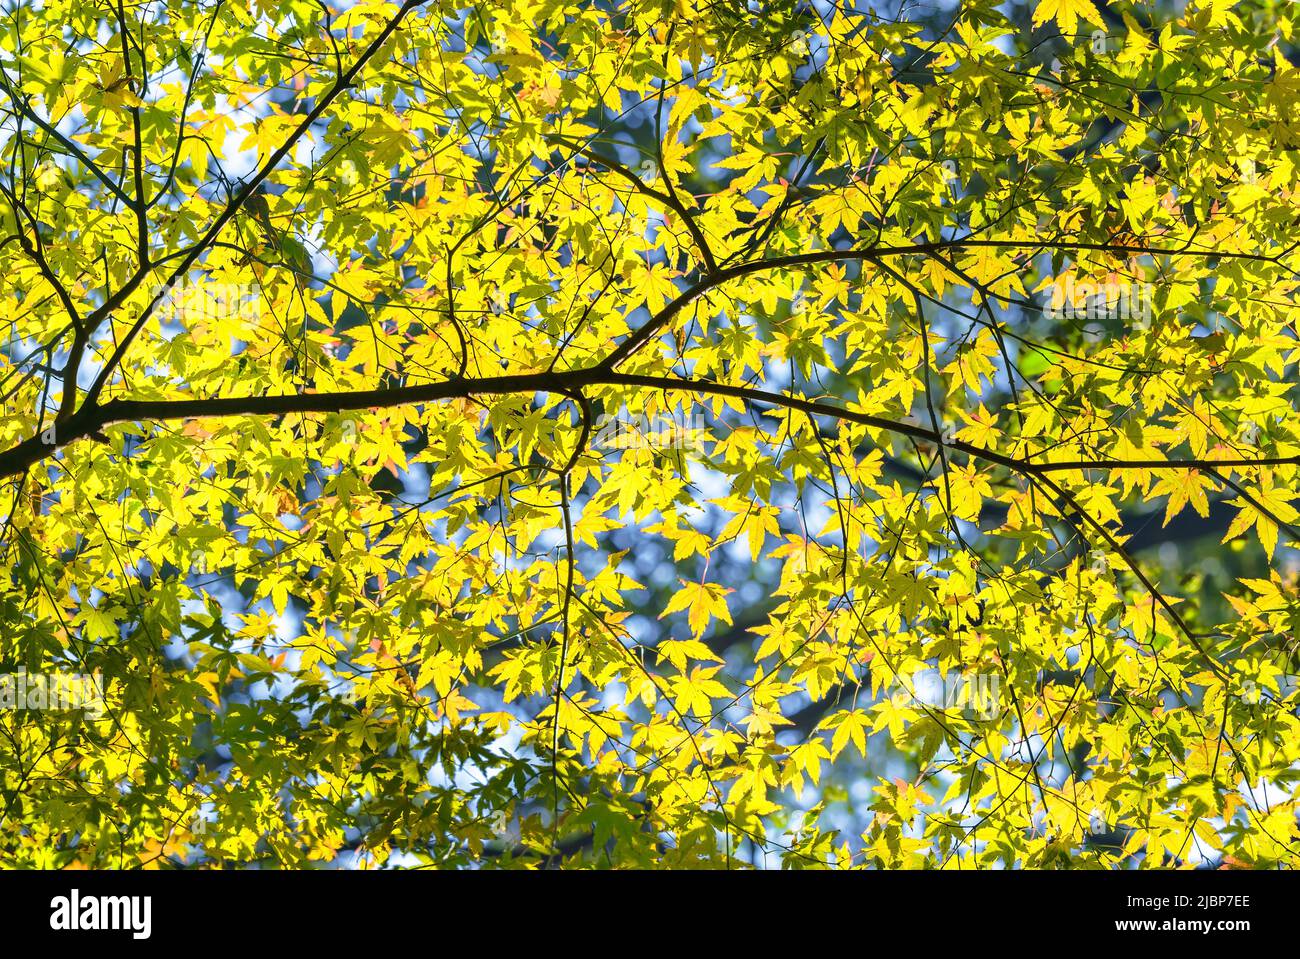 Natural background depicting a branch of Japanese momiji maple tree in autumn with yellow leaves and foliages all over illuminated by a backlight sun Stock Photo